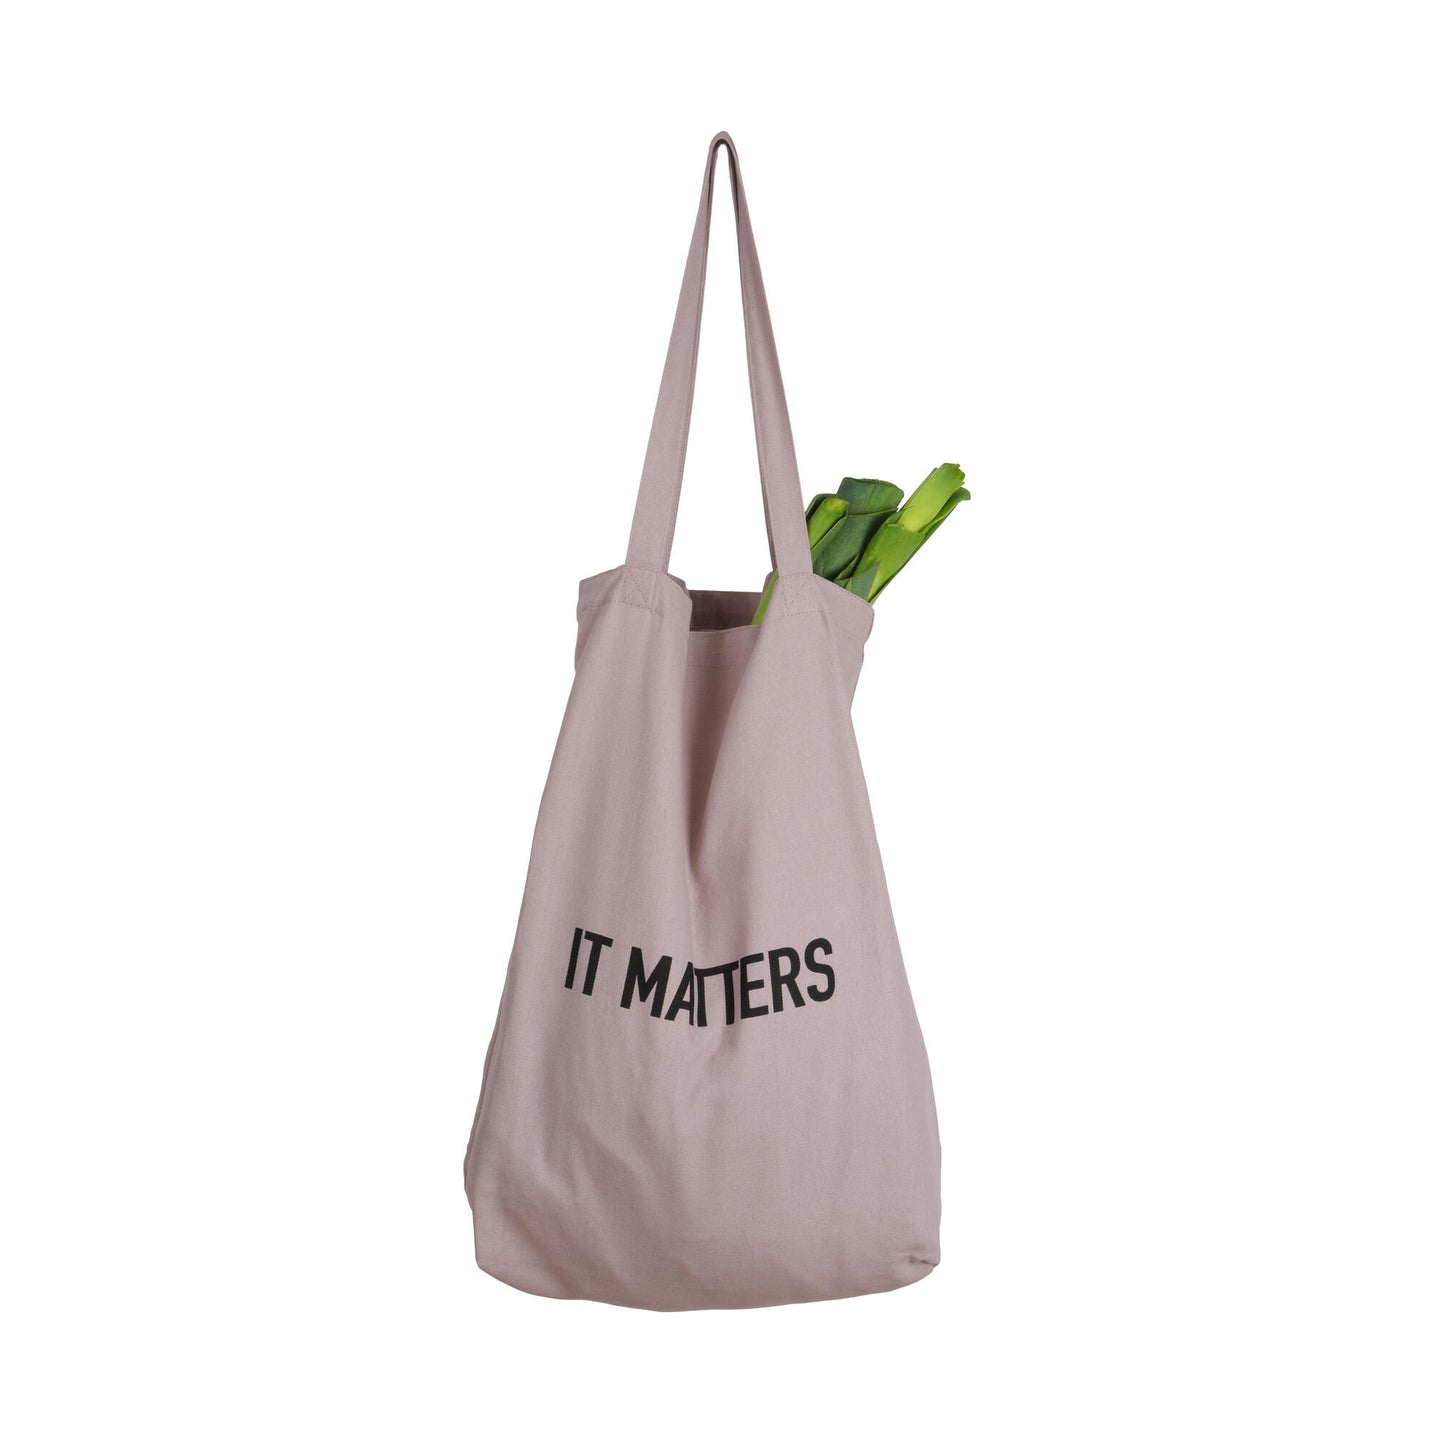 It Matters Bag by The Organic Company